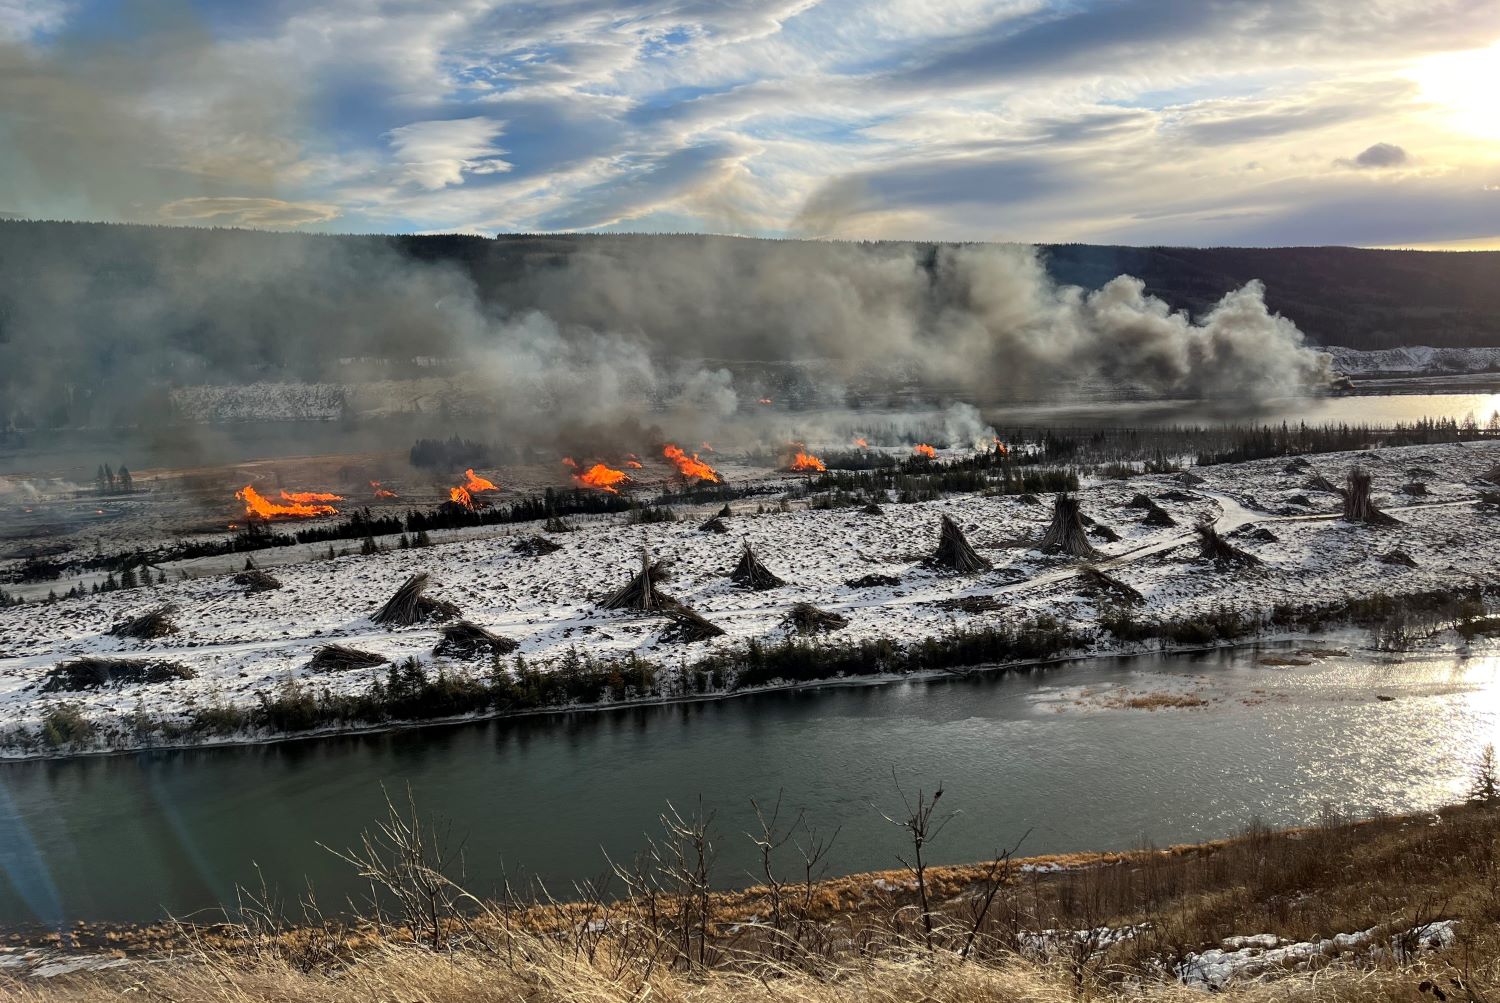 Amidst a snowy rural landscape, many burning piles of wood send up smoke.